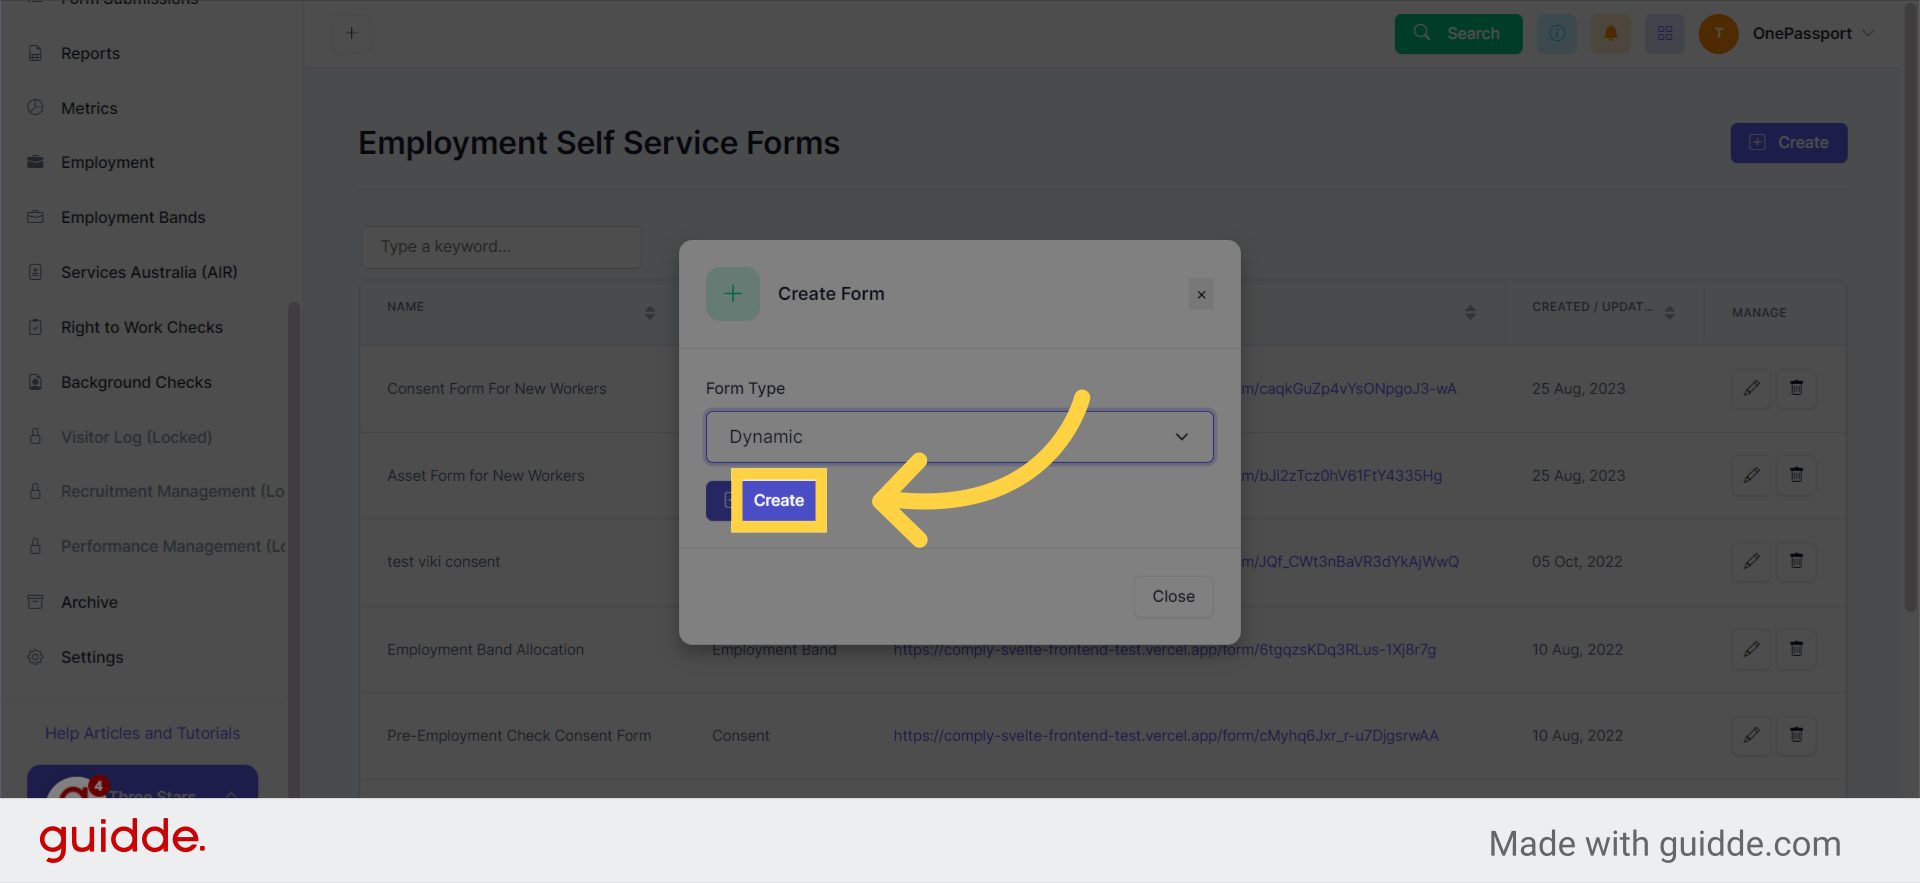 Select Dynamic for the Form Type then click 'Create'